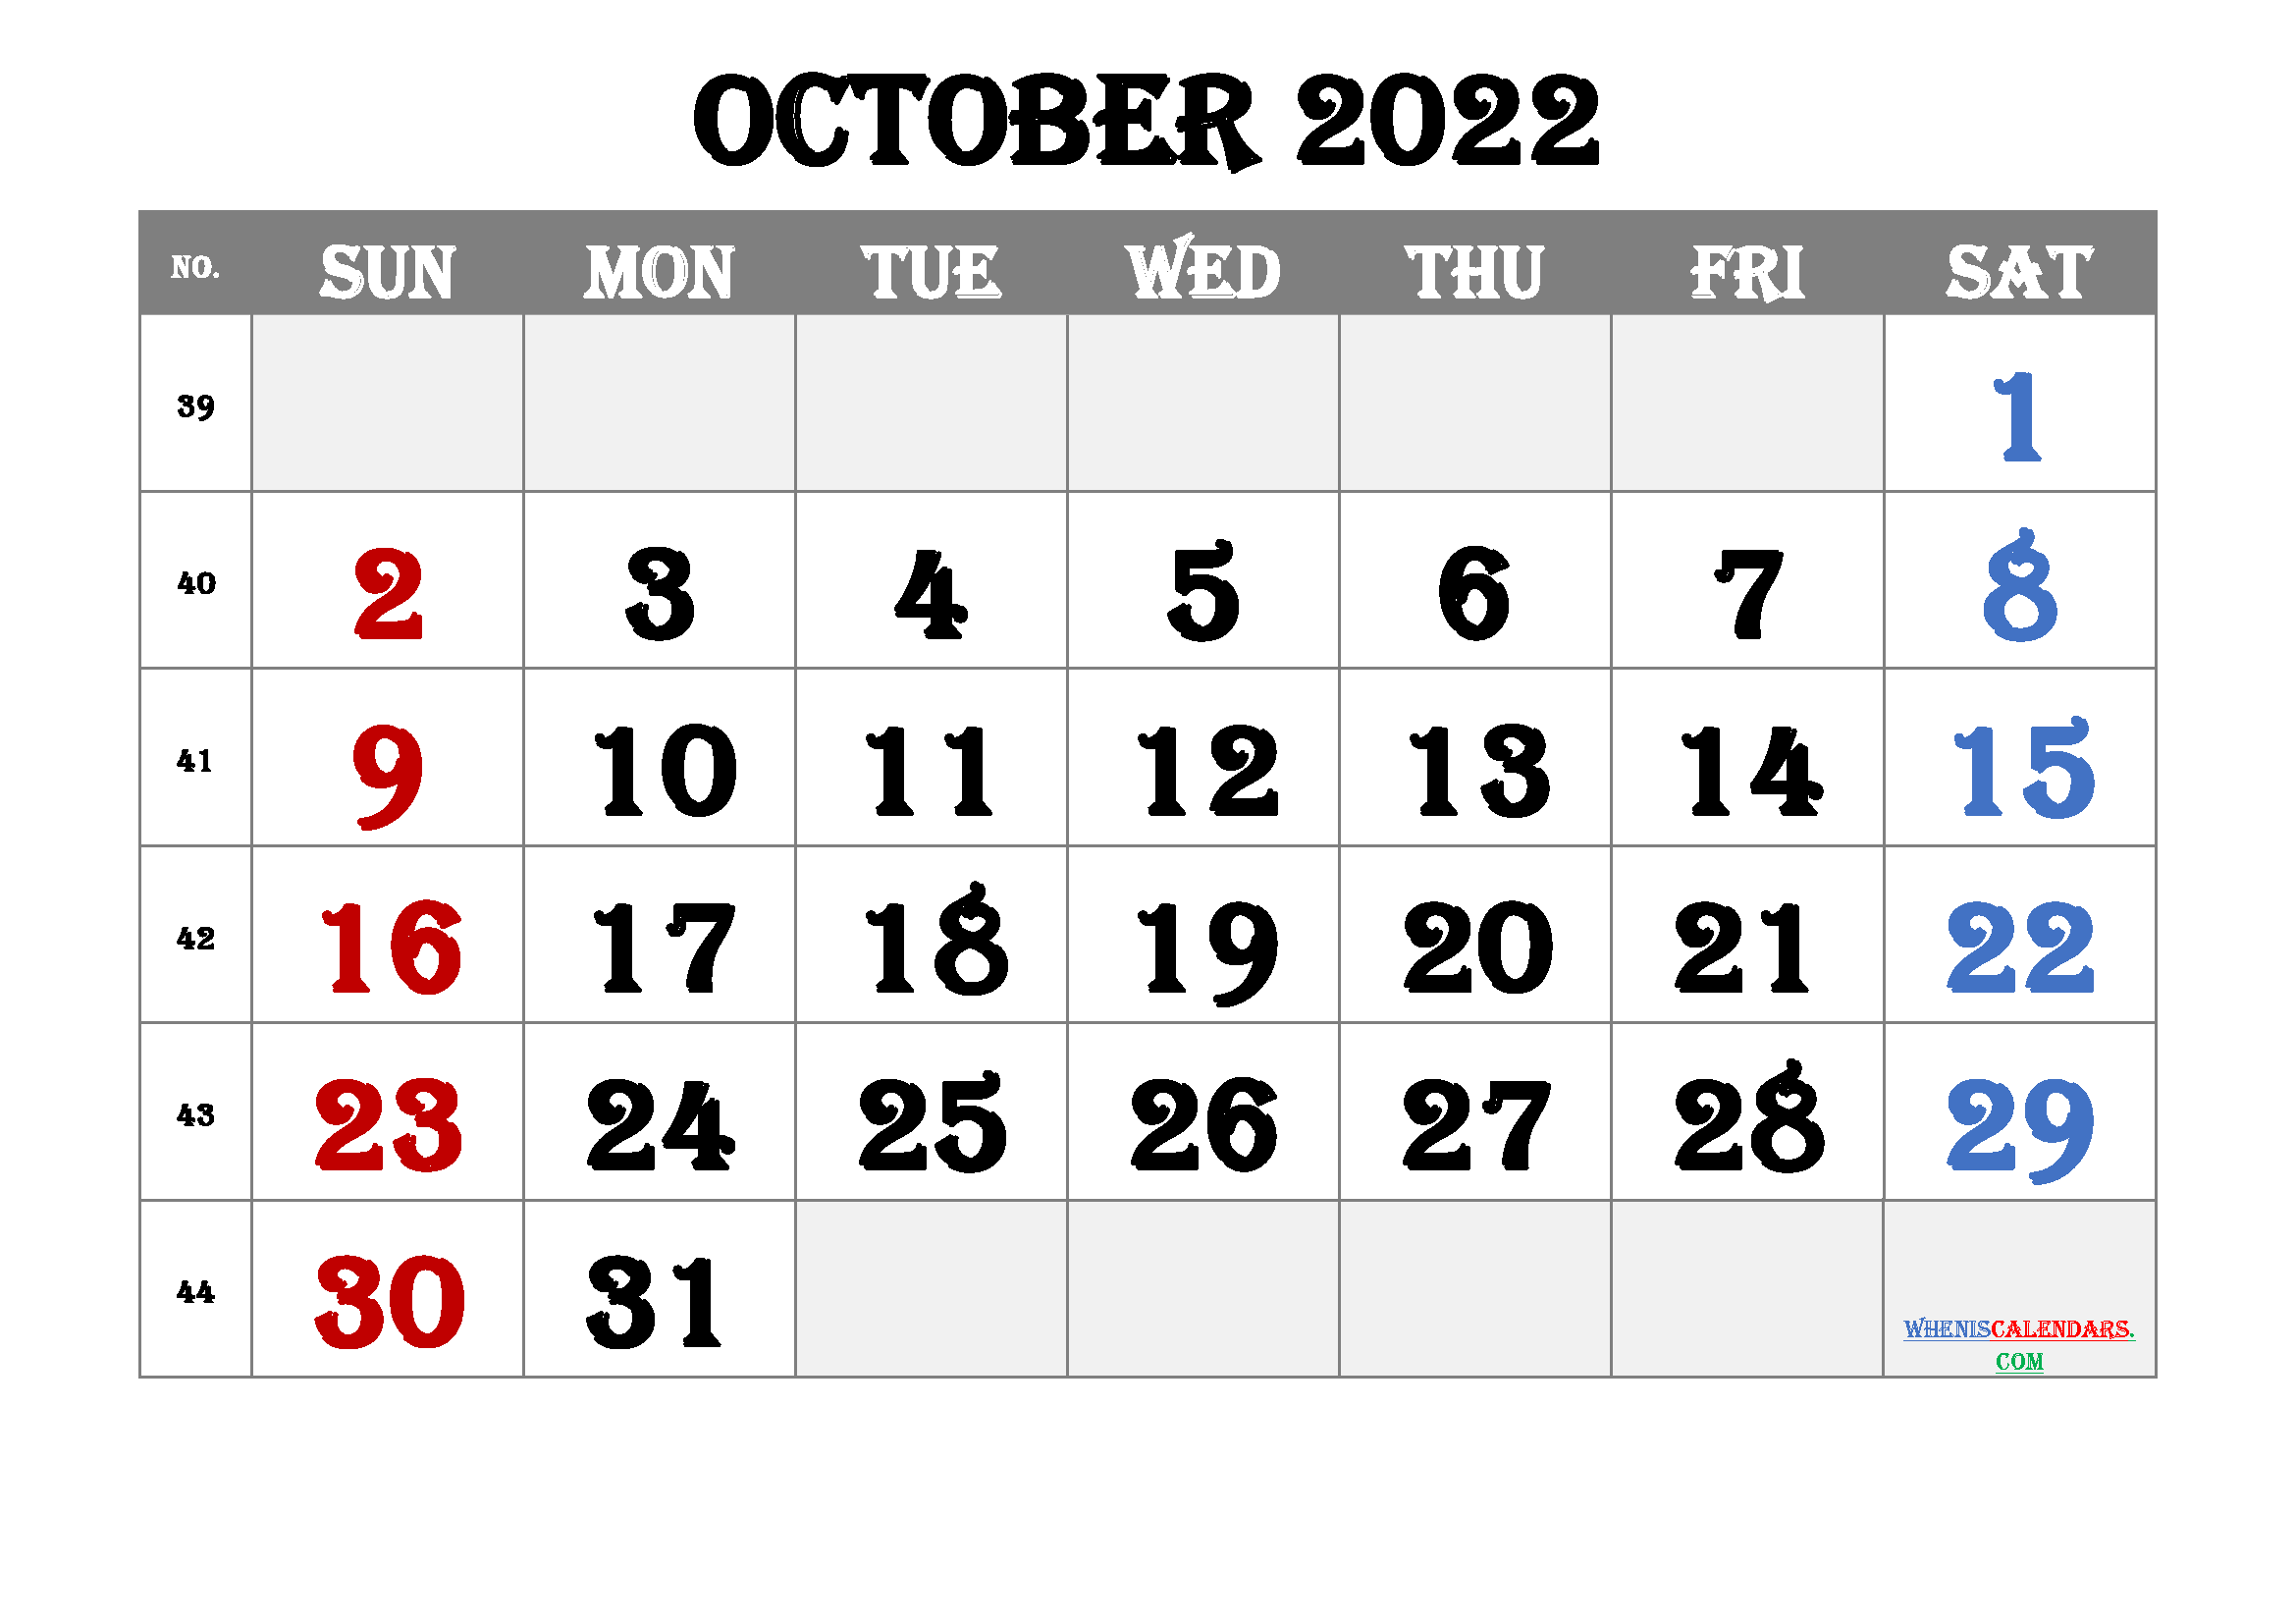 Free Printable Calendar October 2022 with Week Numbers as PDF document and high quality Image (landscape format and can print with A3, A4)